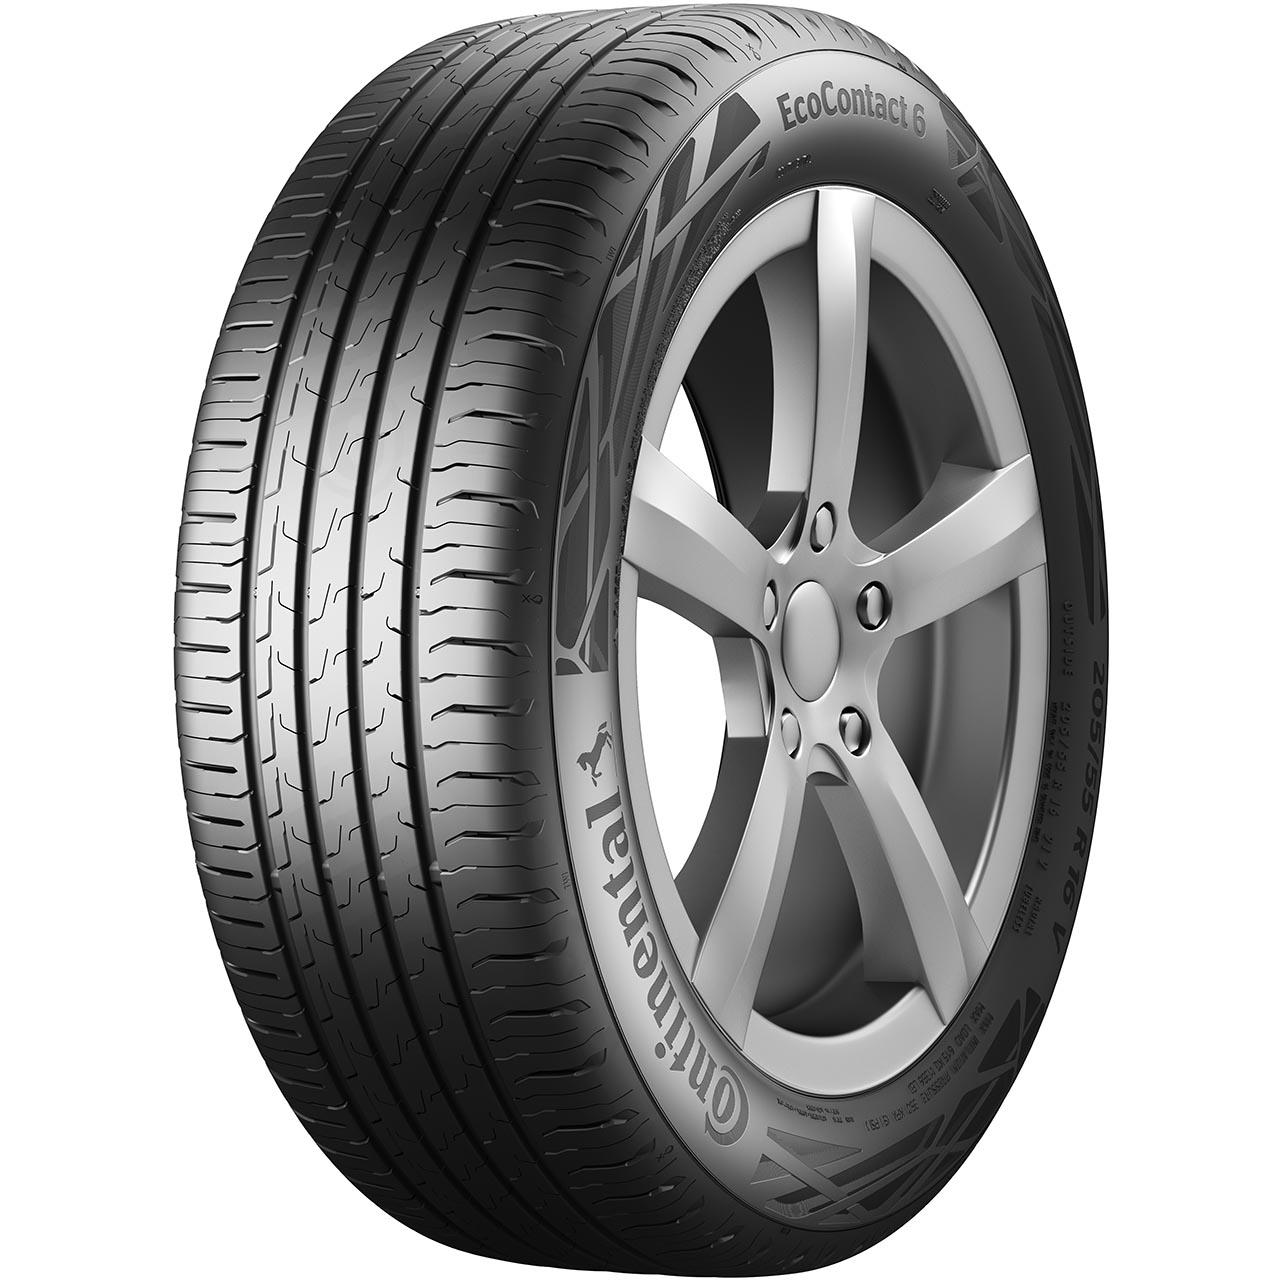 Continental ECOCONTACT 6 185/55R16 87H XL